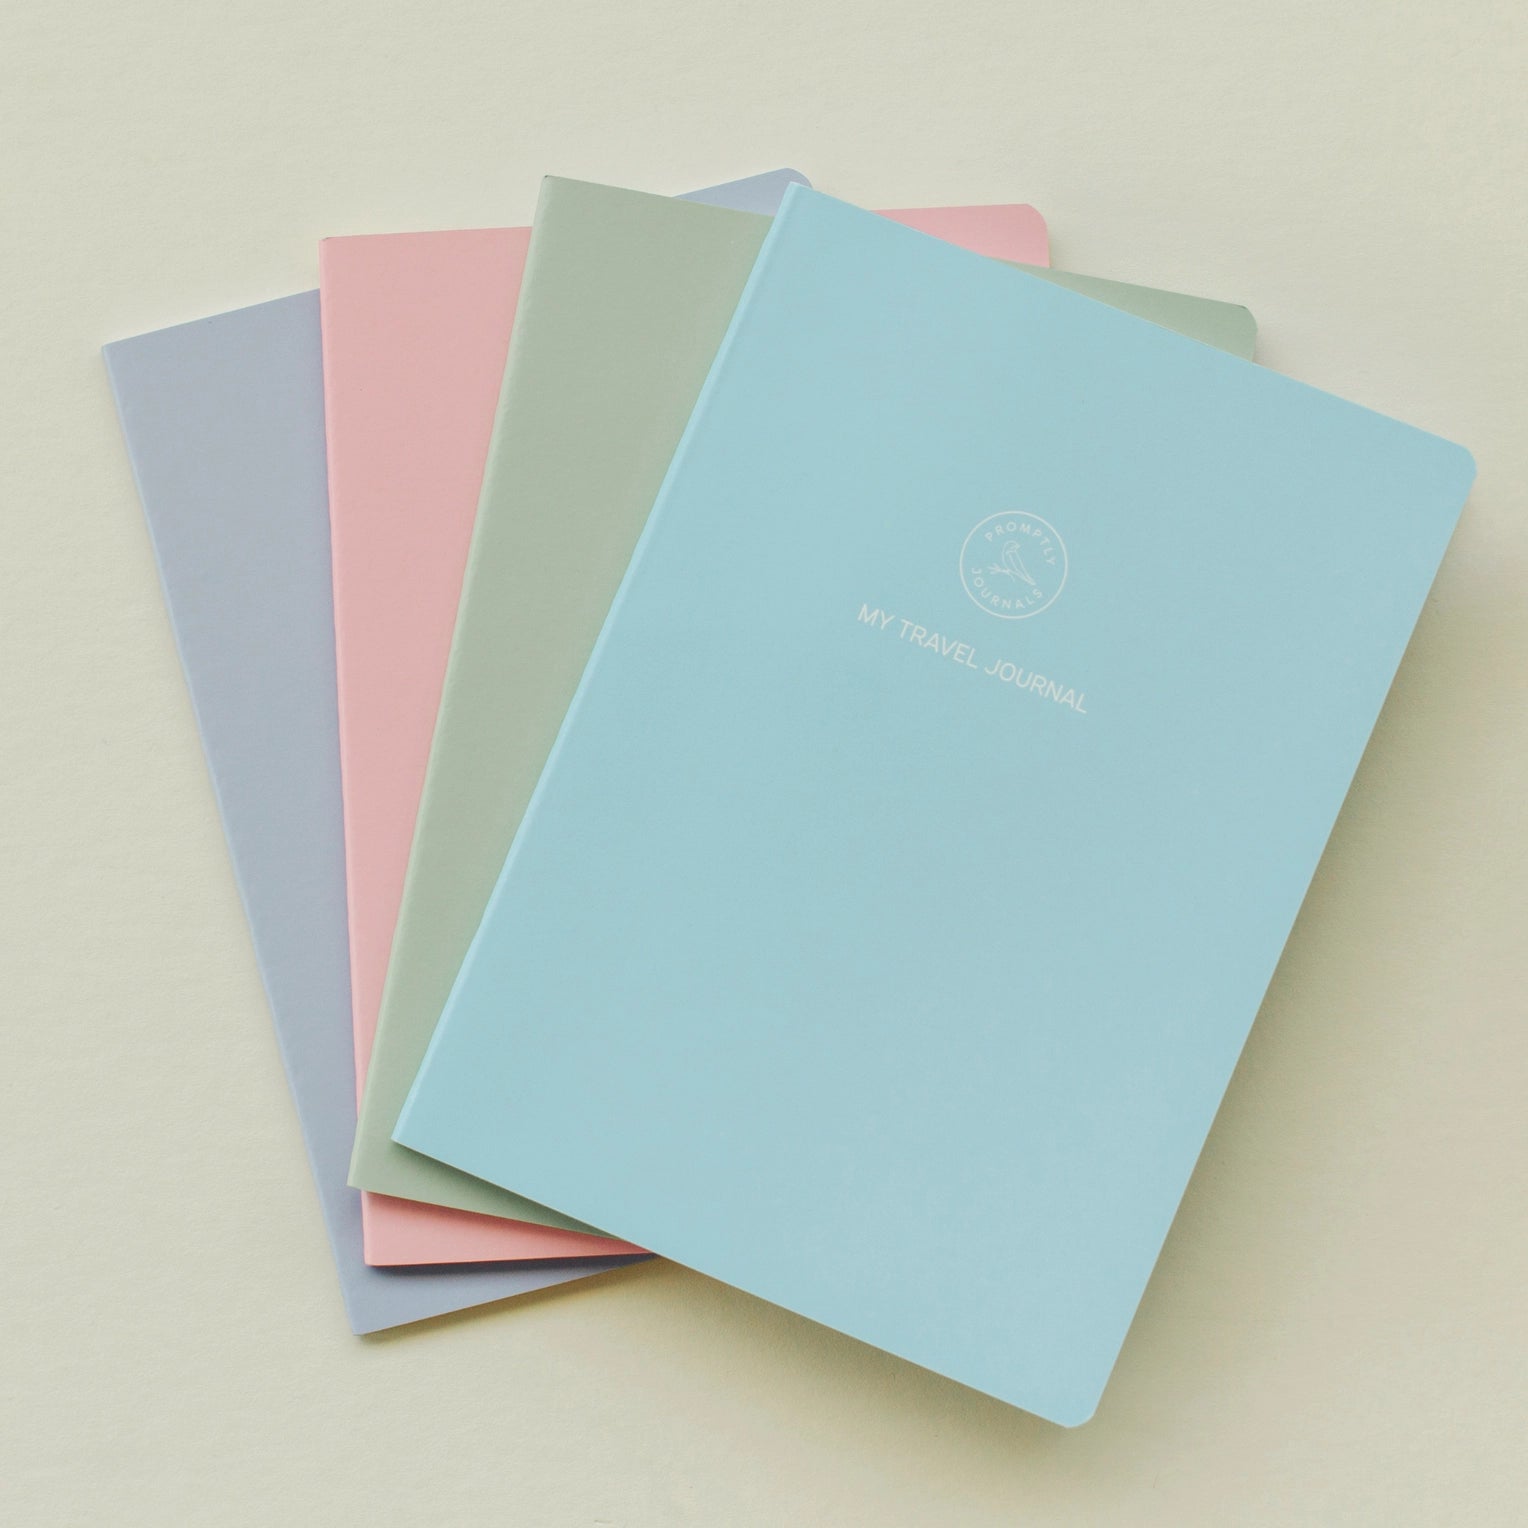 These pastel mini travel journals are perfect to fit in your pocket and document the best parts of your trip, with prompts along the way! This journal is from promptly and sold at BBB Supplies Craft Shop.